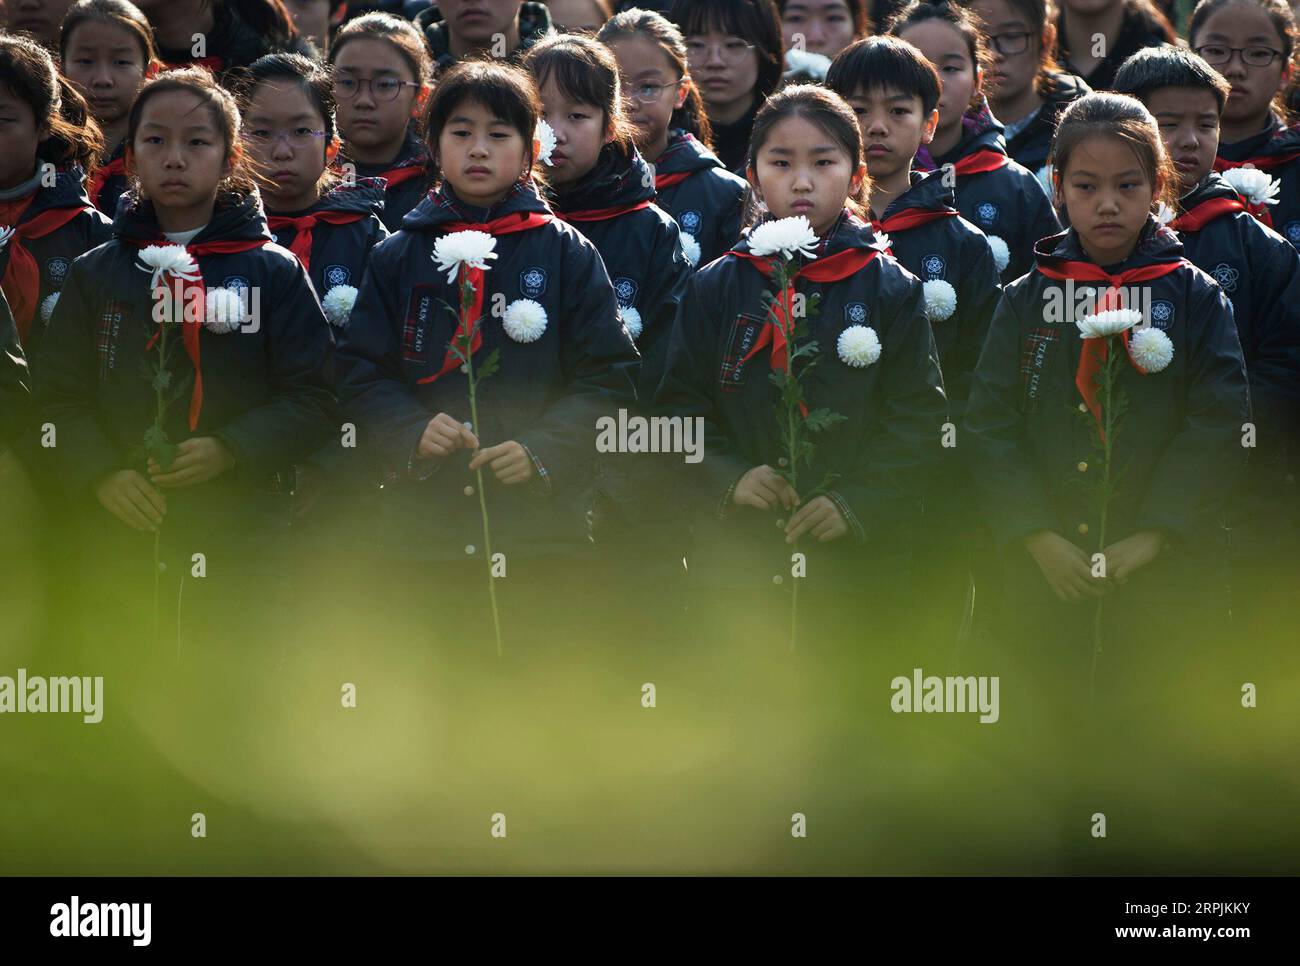 191213 -- NANJING, Dec. 13, 2019 -- People mourn victims of the Nanjing Massacre during a ceremony to mark China s sixth National Memorial Day for Nanjing Massacre victims at the Monument for the victims killed at the Zhongshan Dock in the massacre in Nanjing, east China s Jiangsu Province, Dec. 13, 2019.  CHINA-NANJING MASSACRE VICTIMS-NATIONAL MEMORIAL CEREMONY CN LixYuze PUBLICATIONxNOTxINxCHN Stock Photo